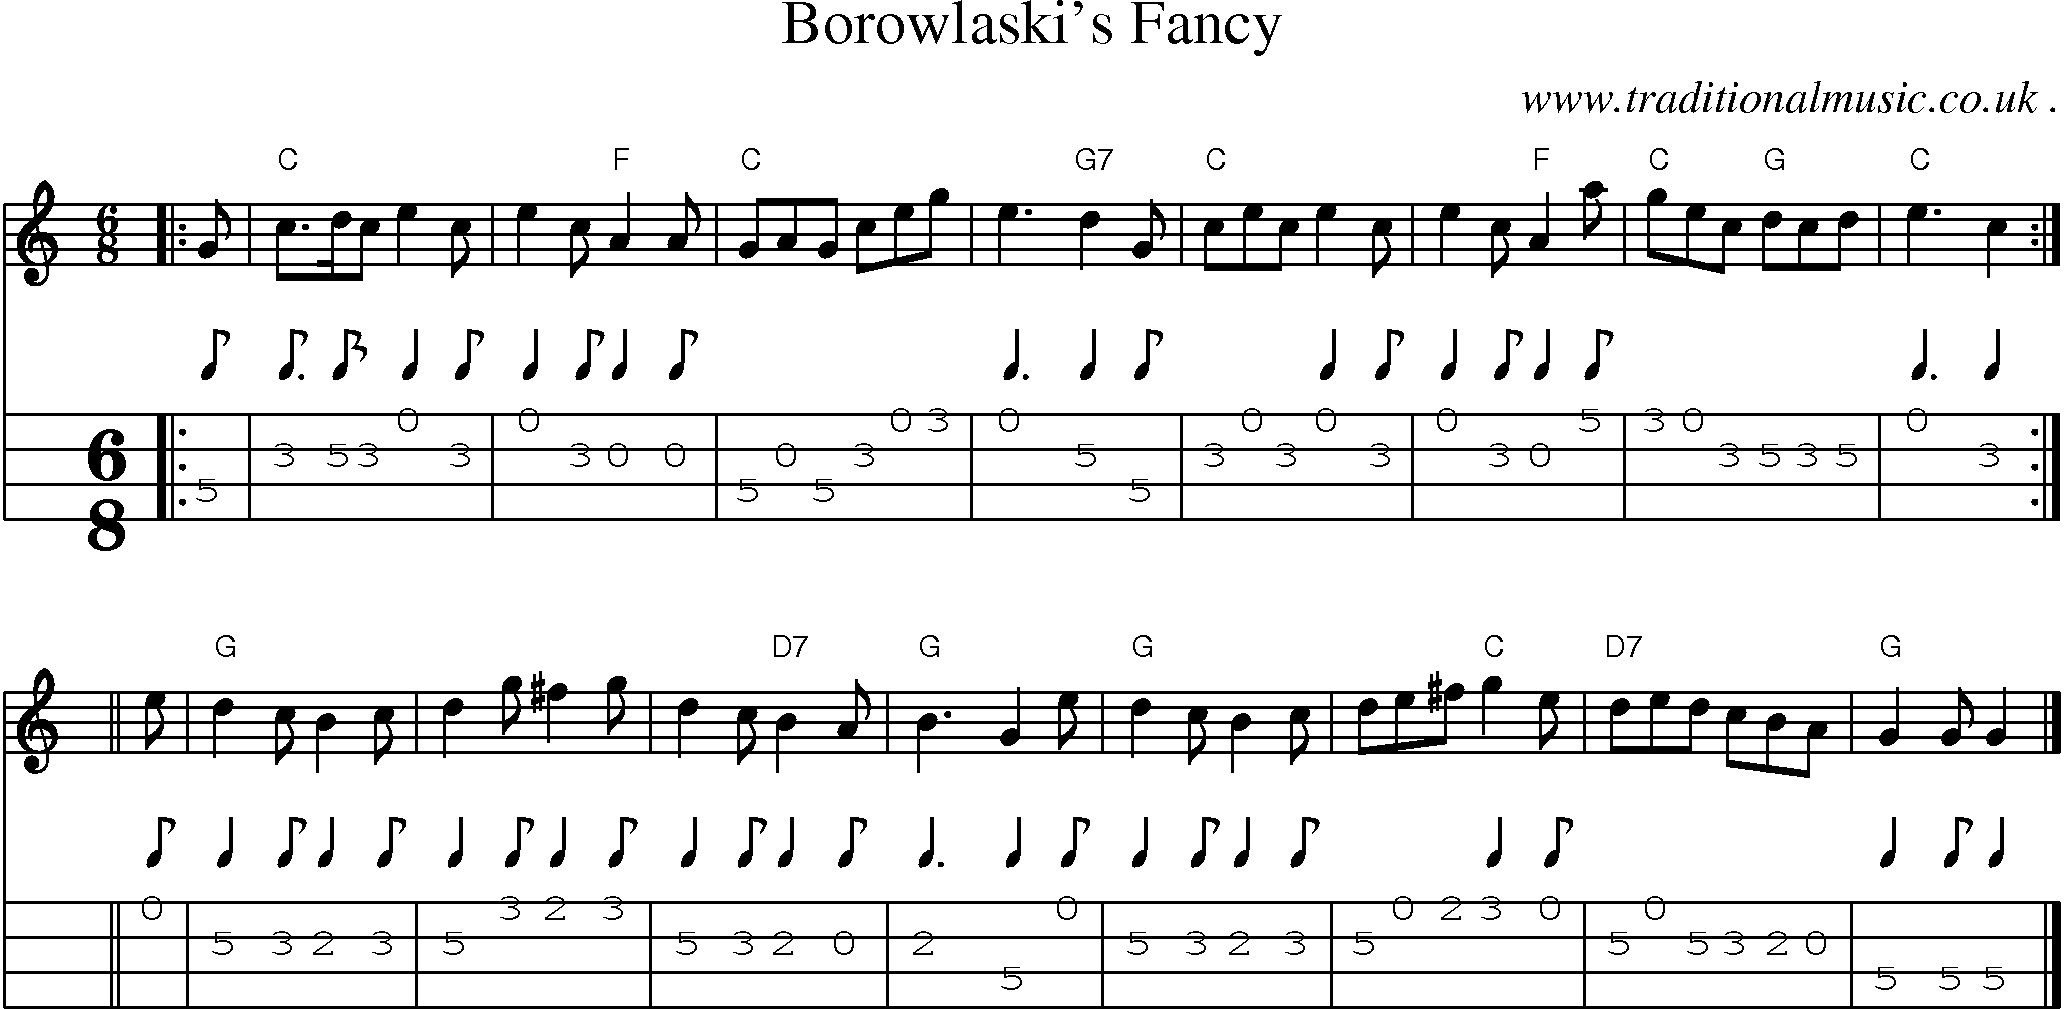 Sheet-music  score, Chords and Mandolin Tabs for Borowlaskis Fancy